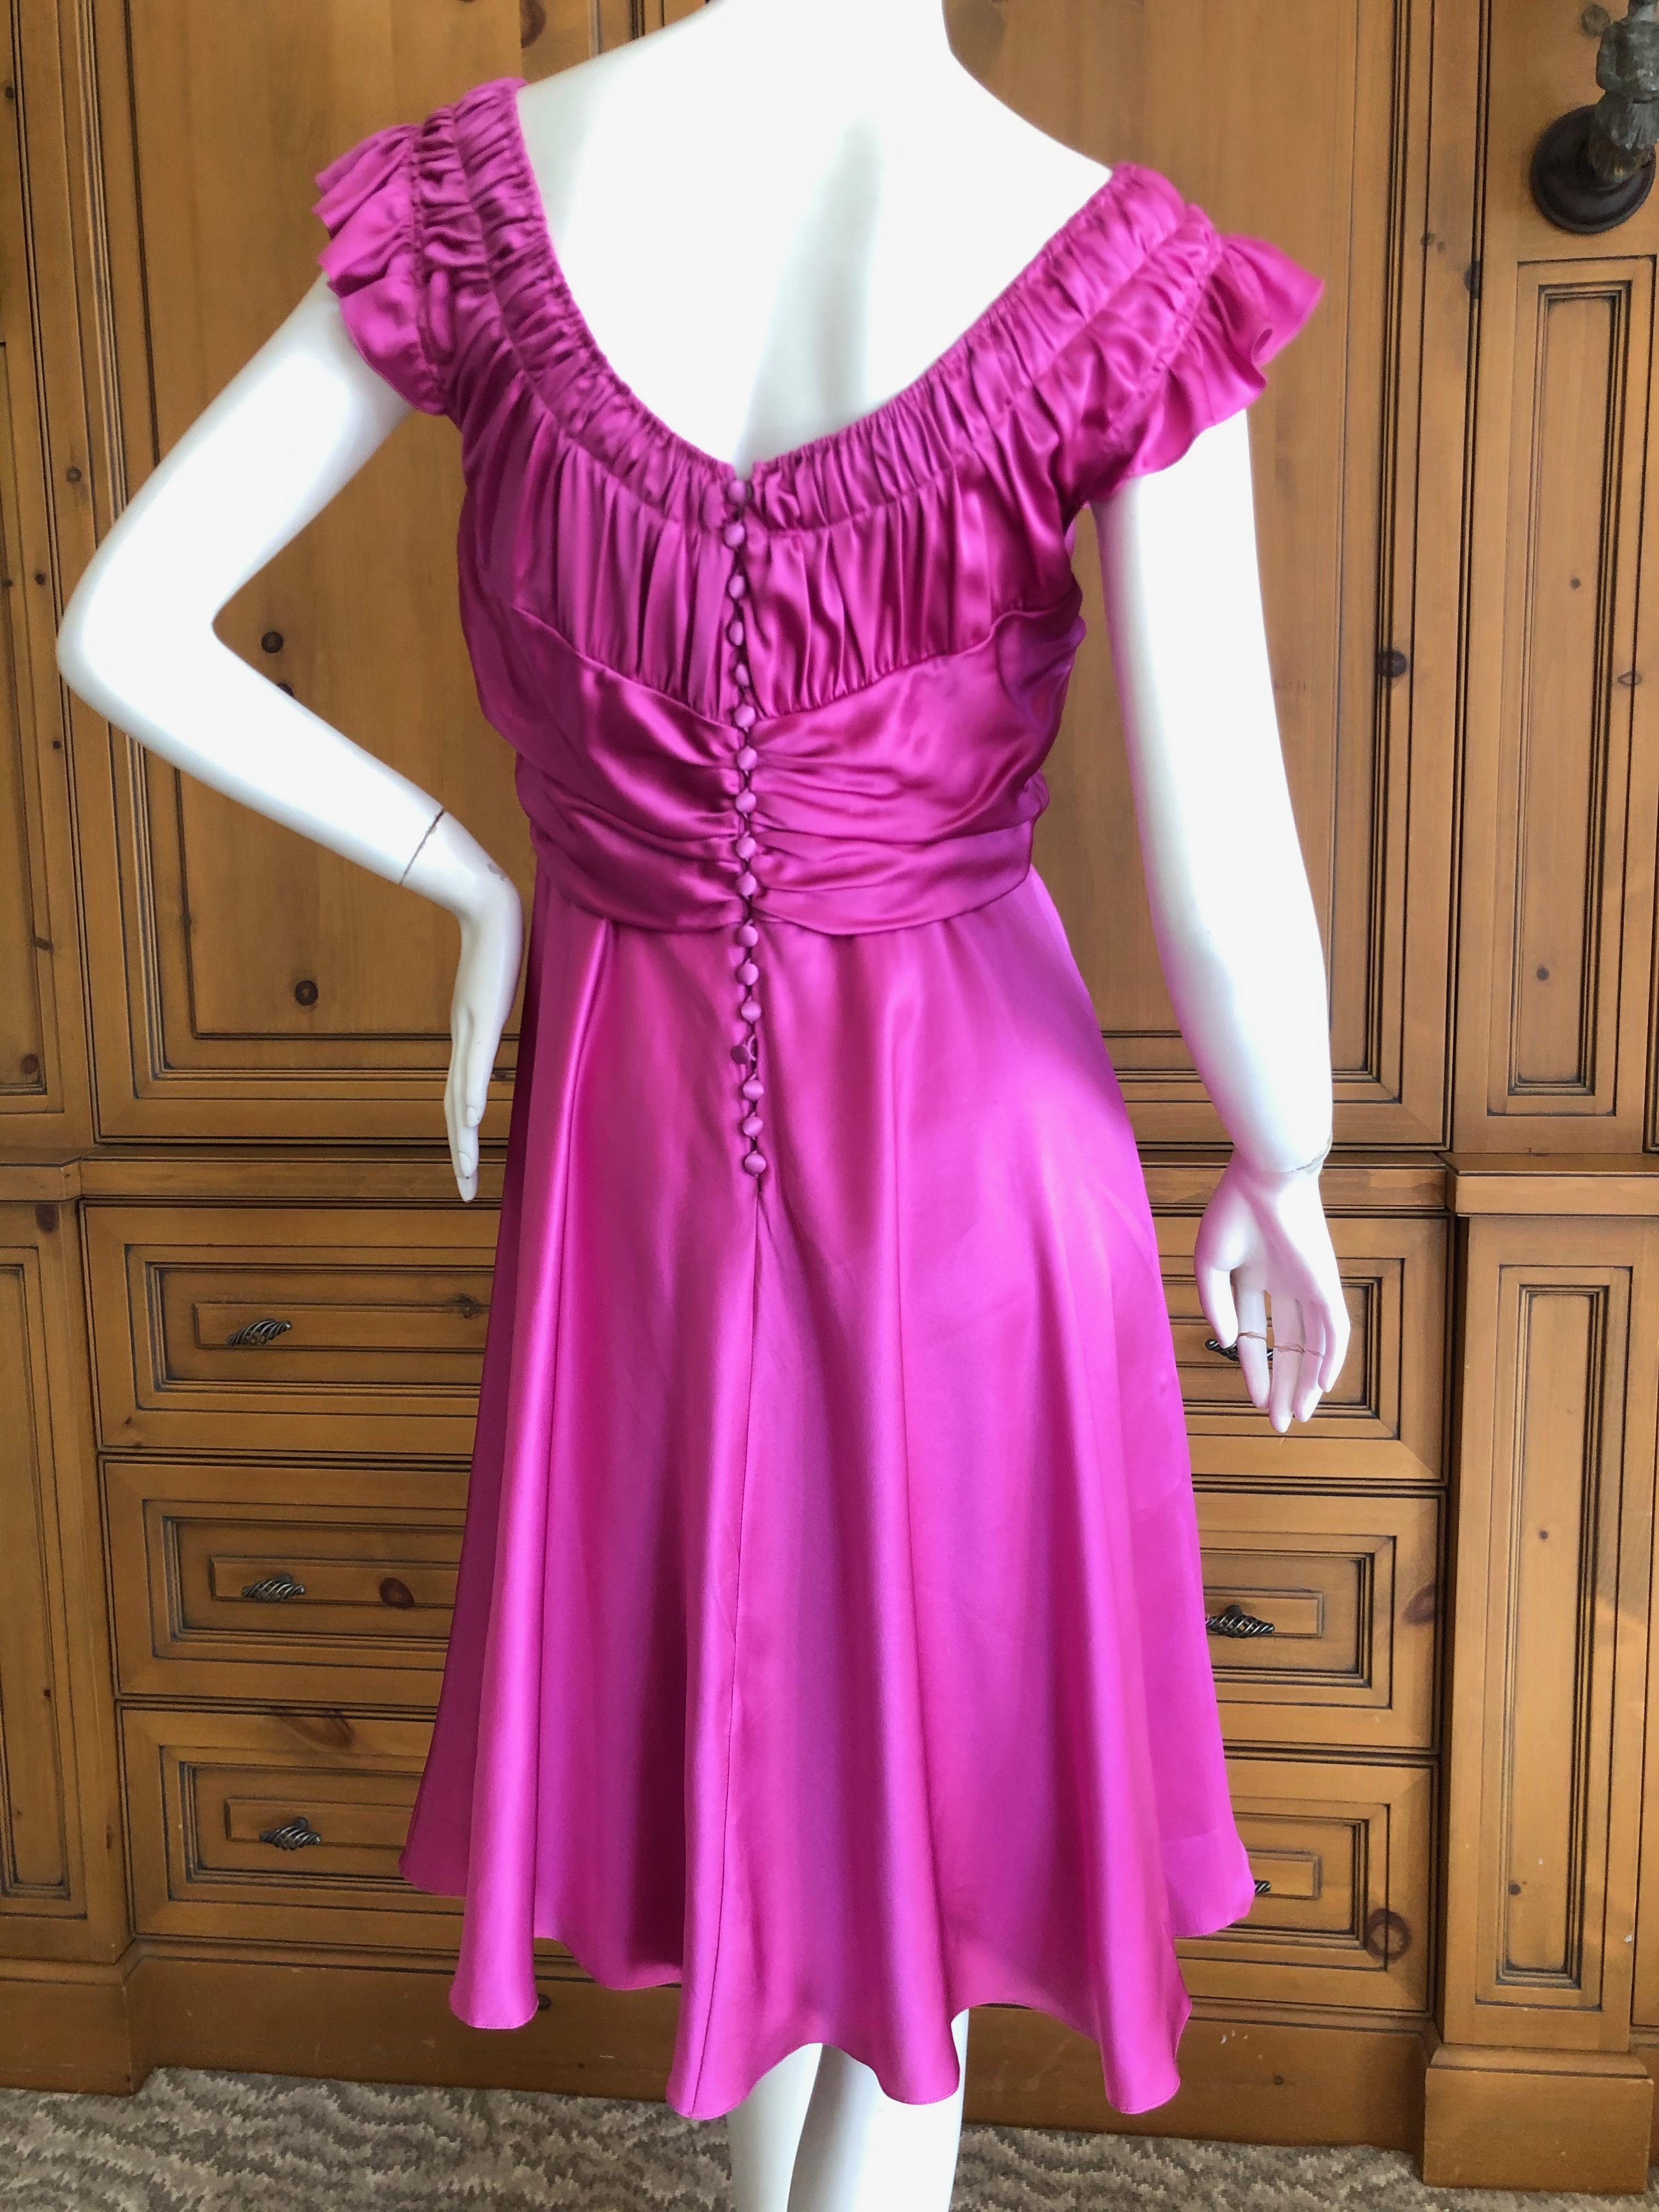   John Galliano Vintage Pink Low Cut Dress with Gathered Details In Excellent Condition For Sale In Cloverdale, CA